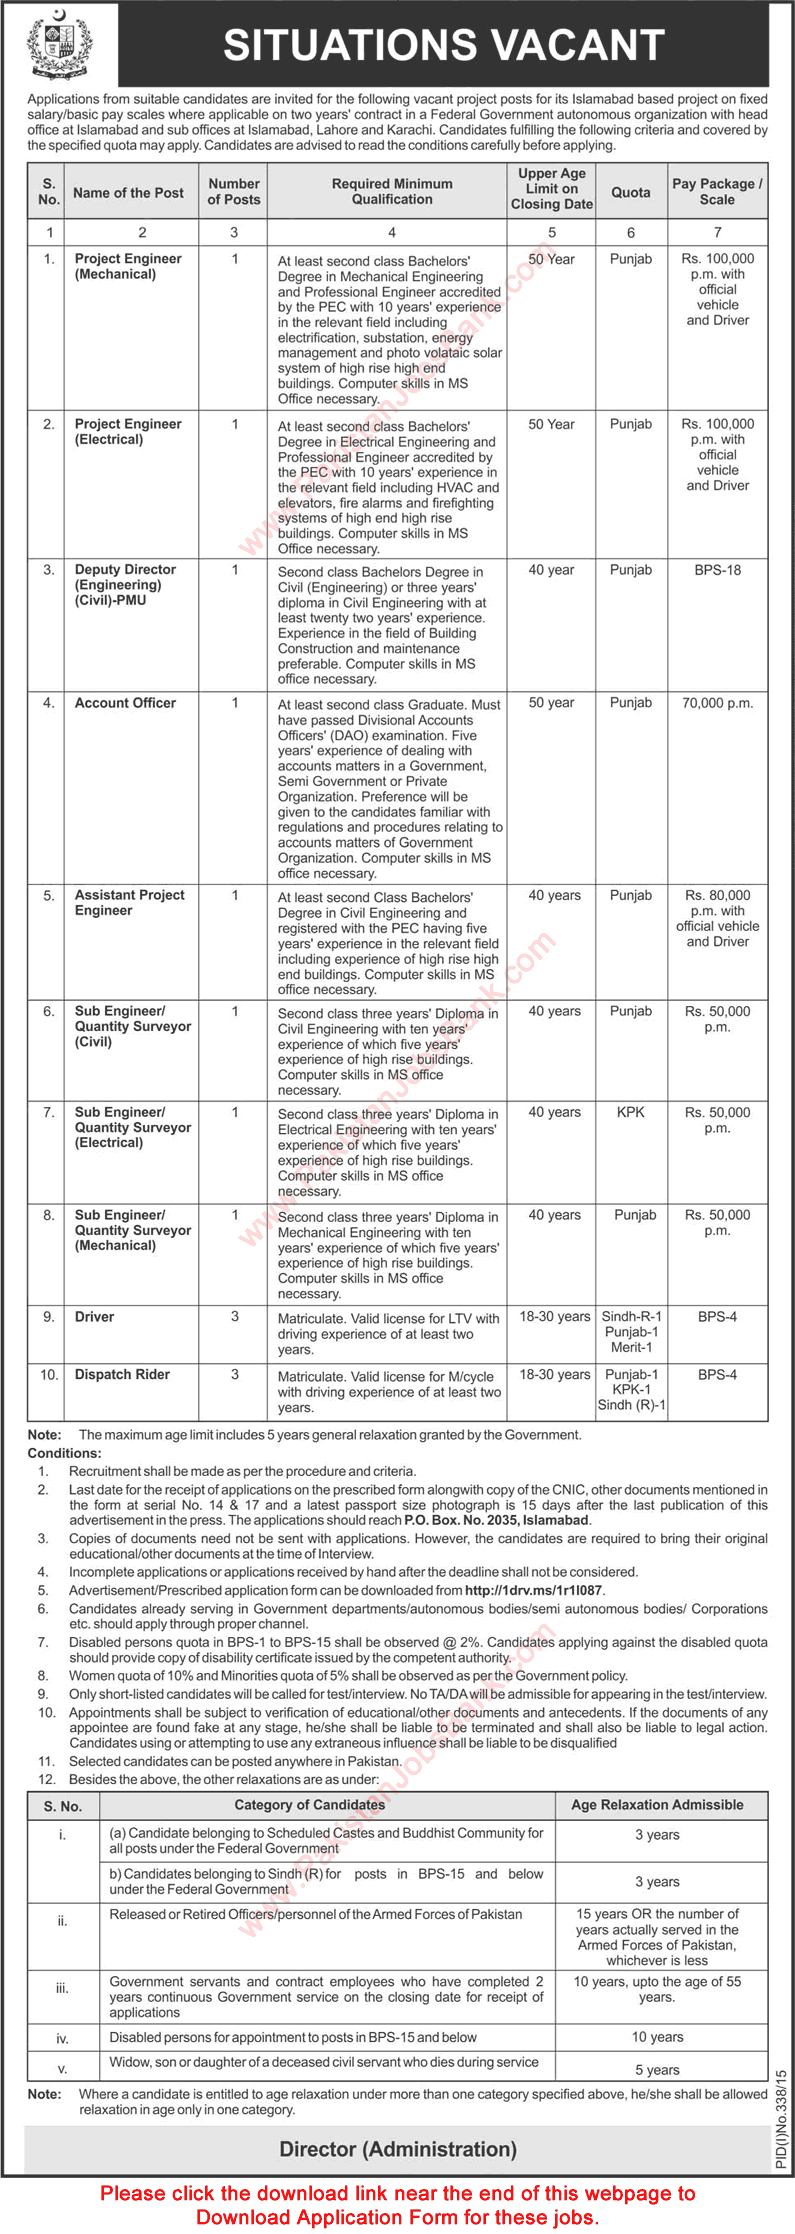 PO Box 2035 Islamabad Jobs Application Form 2015 July Federal Employees Benevolent and Group Insurance Funds